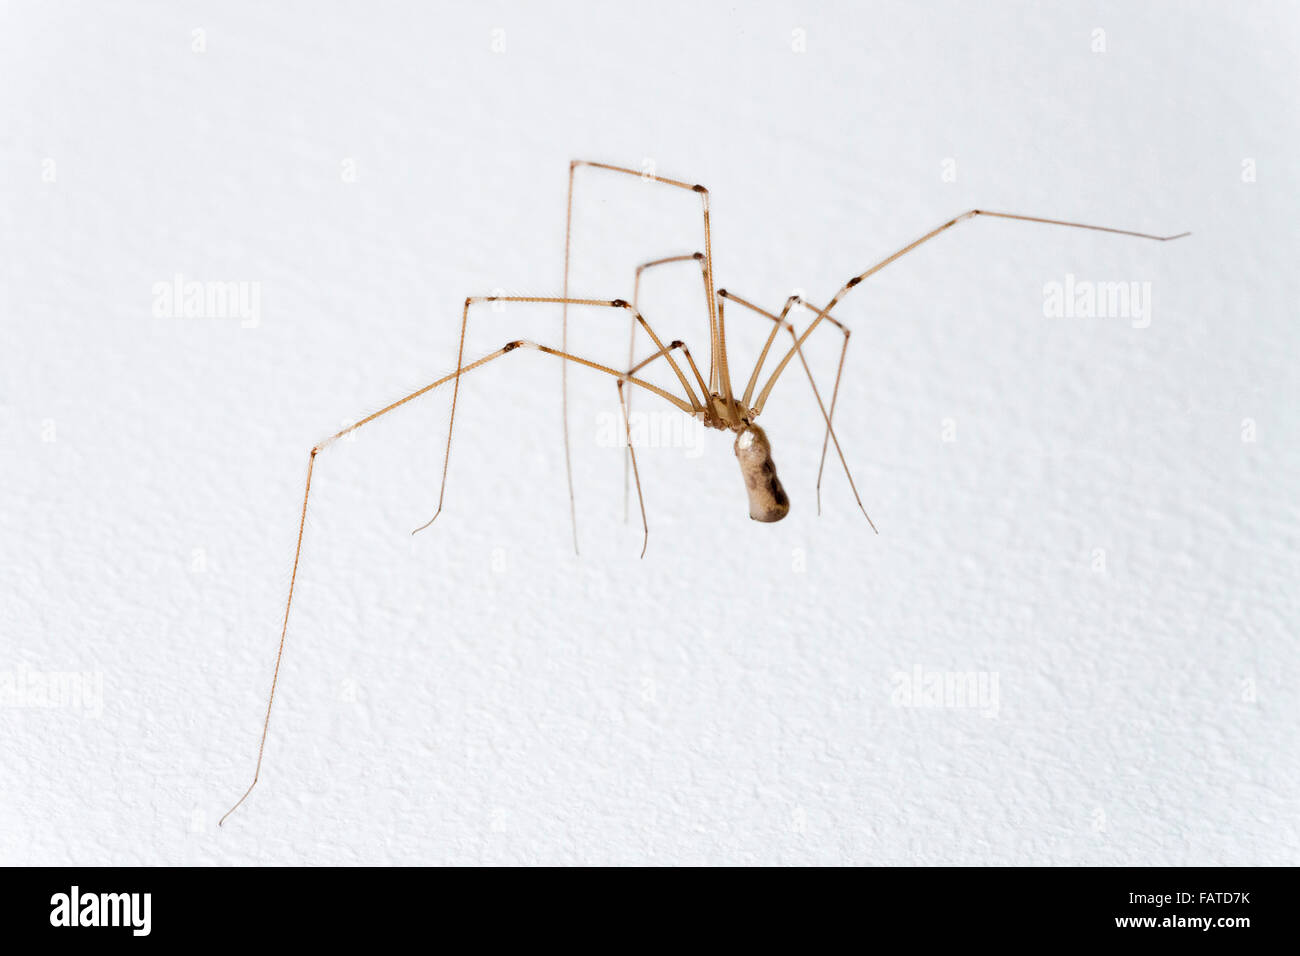 Pholcus phalangioides known as a cellar or skull spider Stock Photo